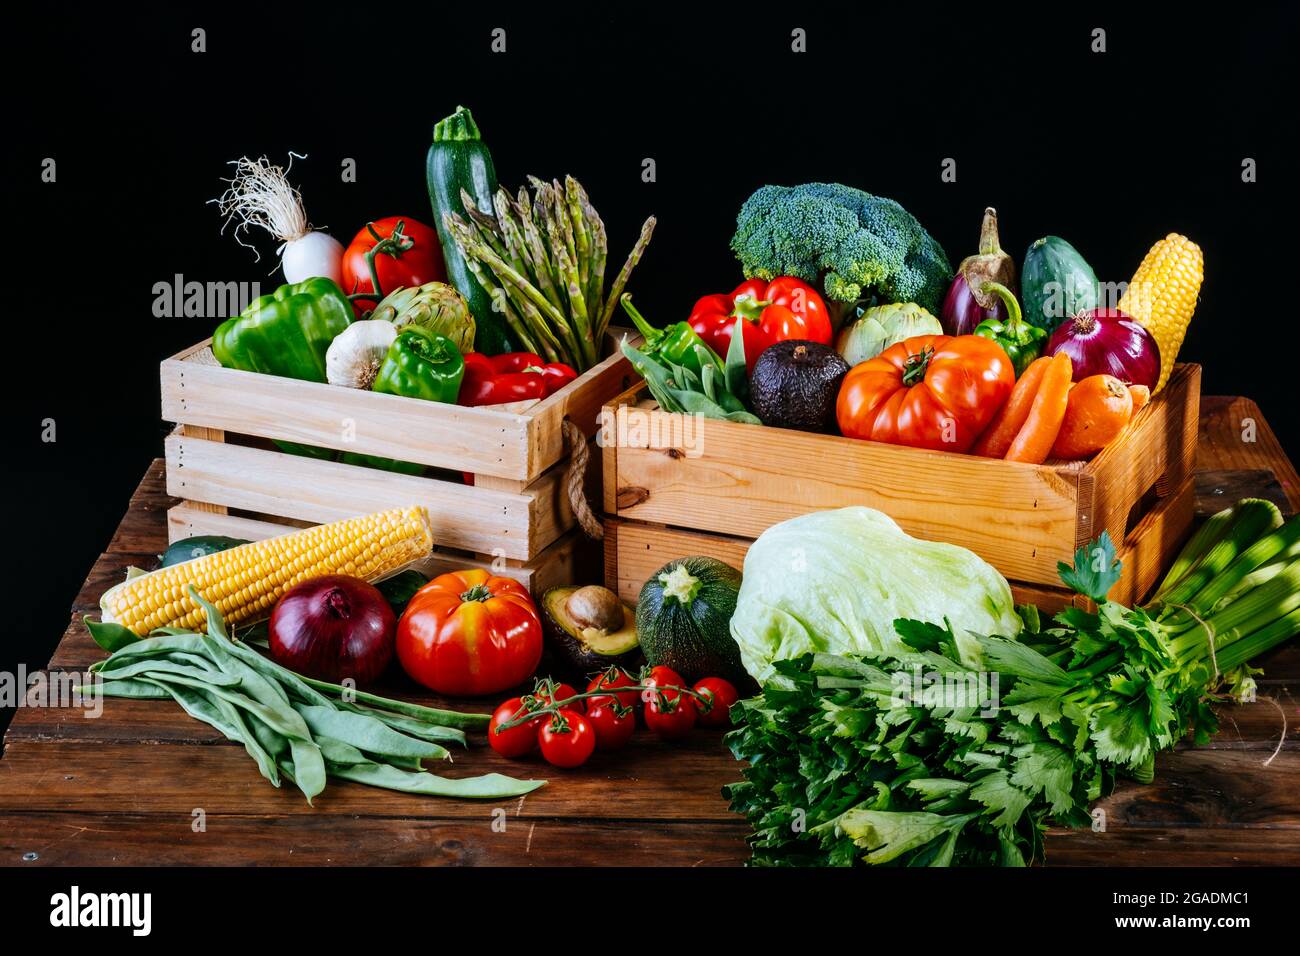 Boxes full of different types of healthy organic vegetables for a vegan diet Stock Photo